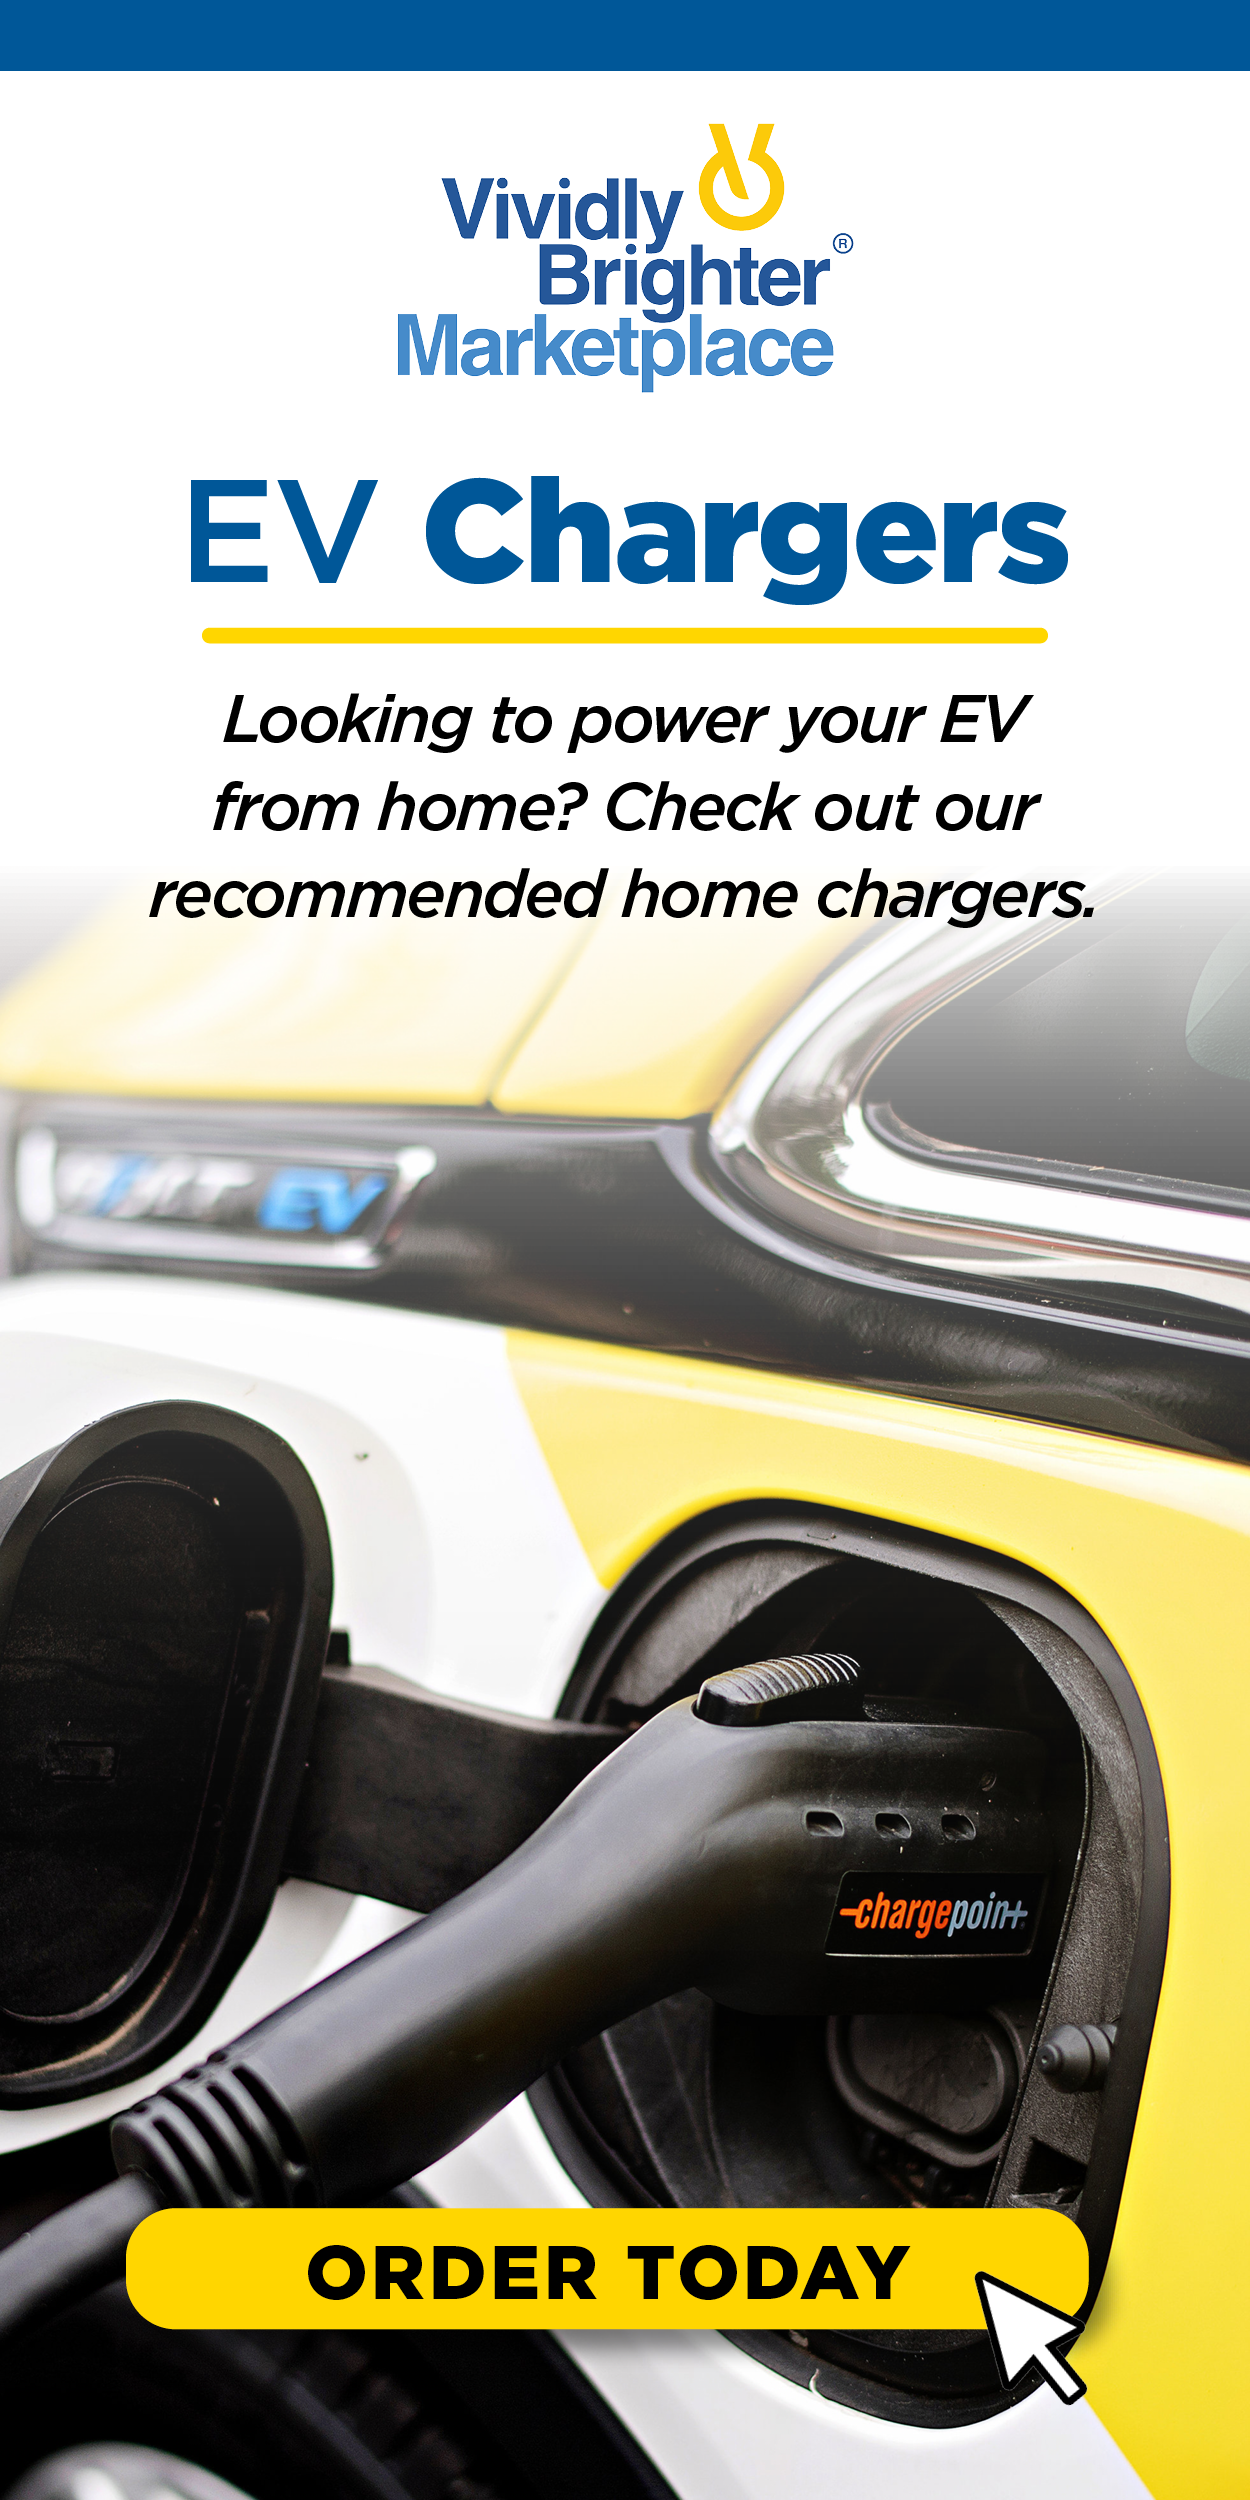 VB Marketplace Ad EV Chargers